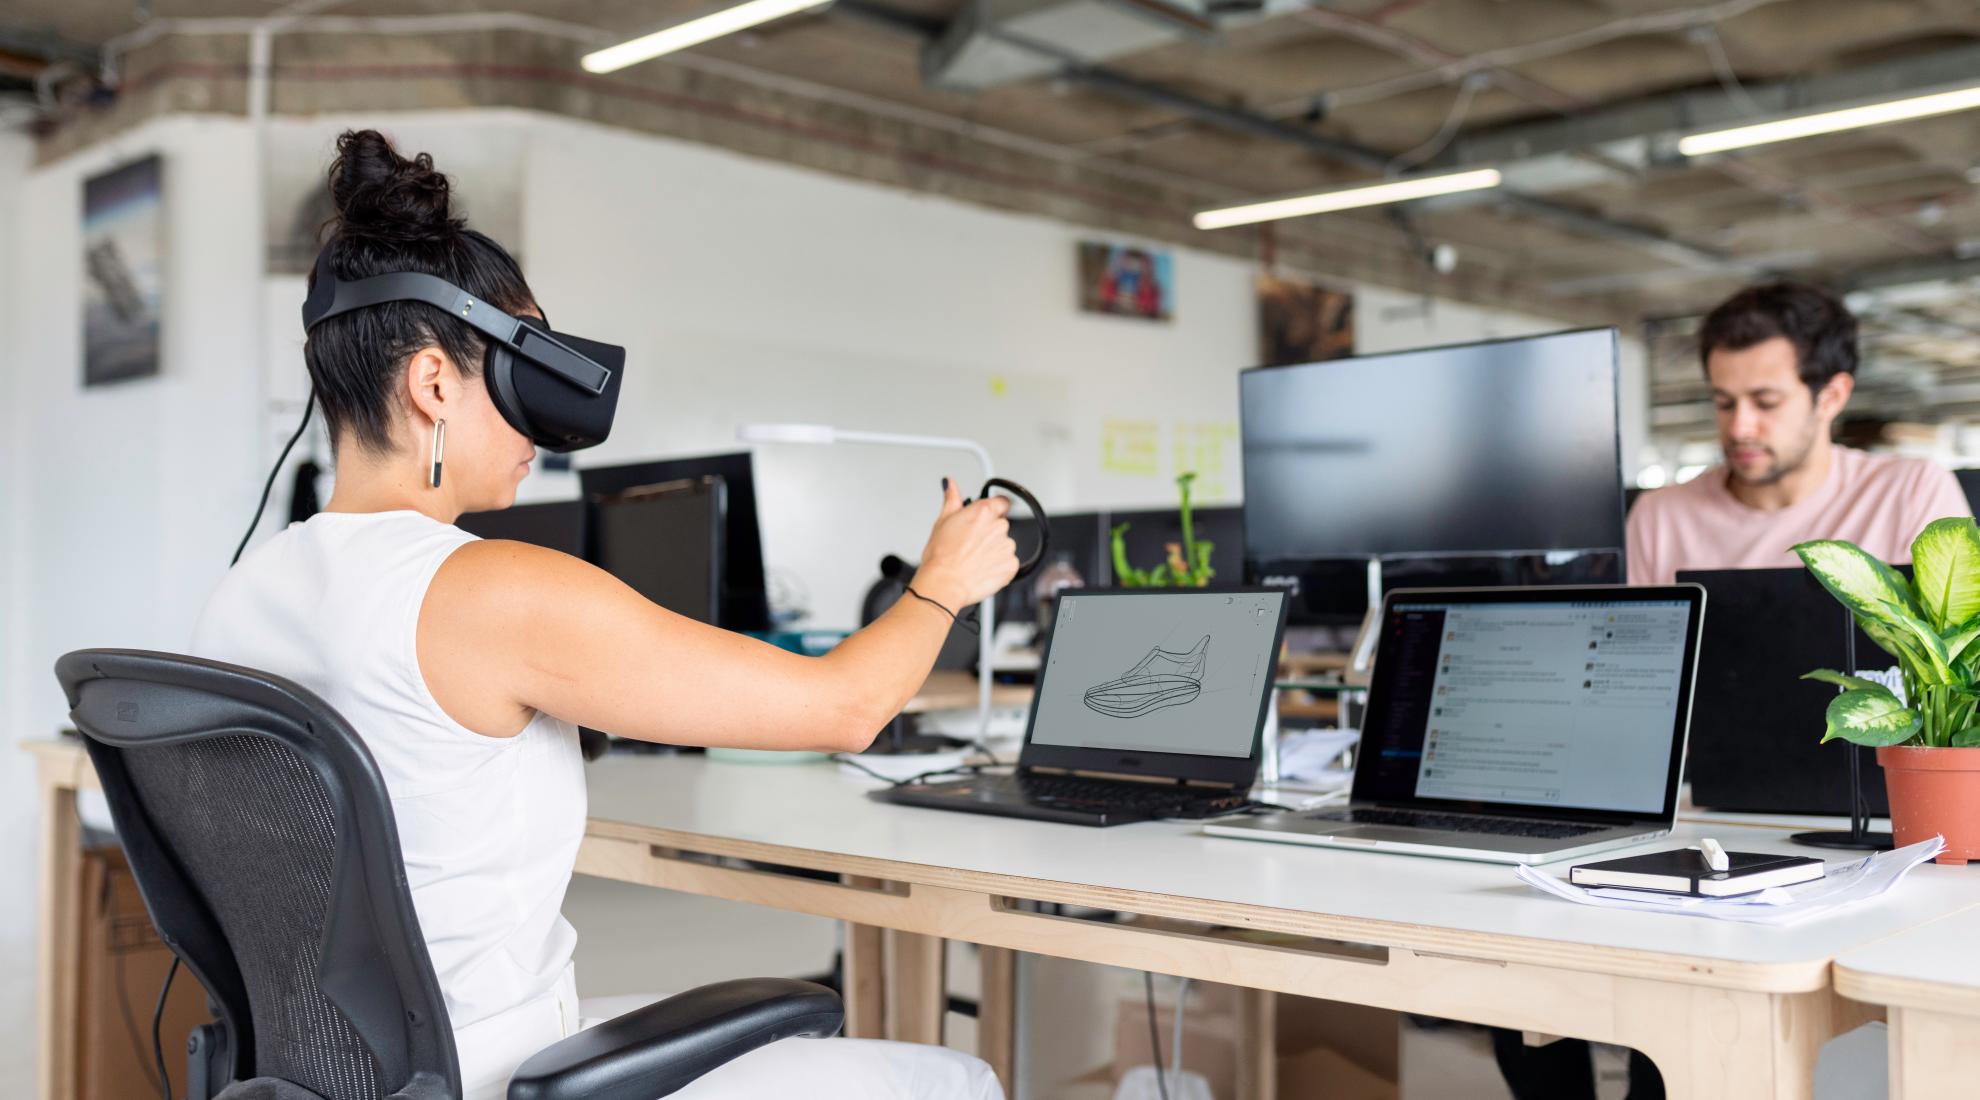 Asynchronous reality at VR workplaces